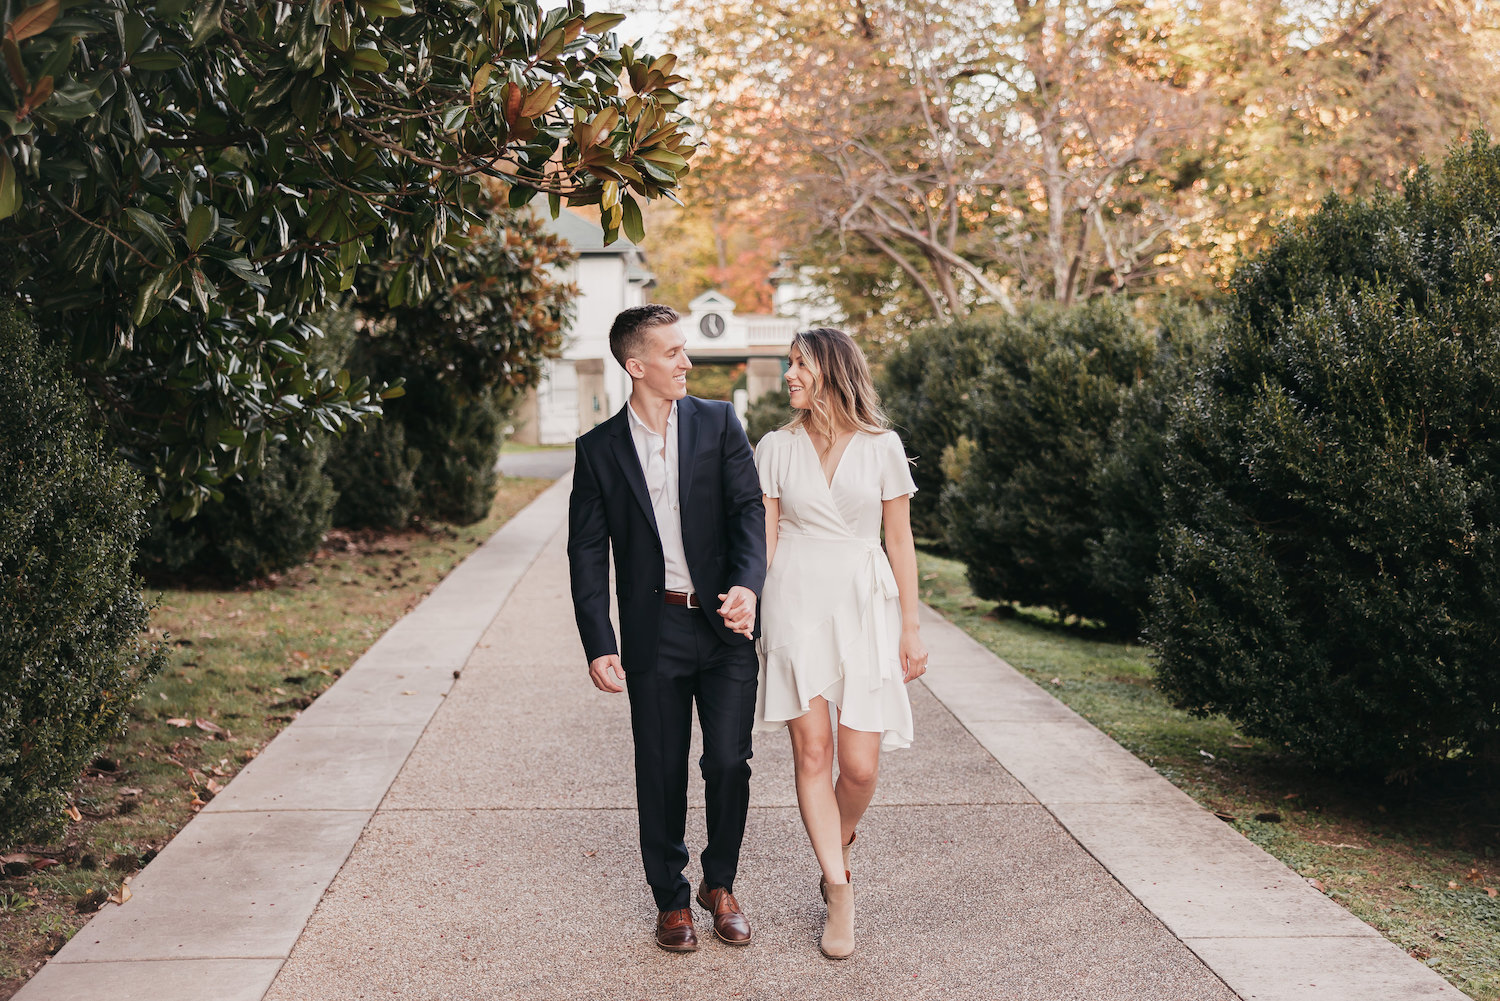 How to Choose a Wedding Photographer (Everything You Need to Know): Couple holding hands as they walk together during their engagement session.